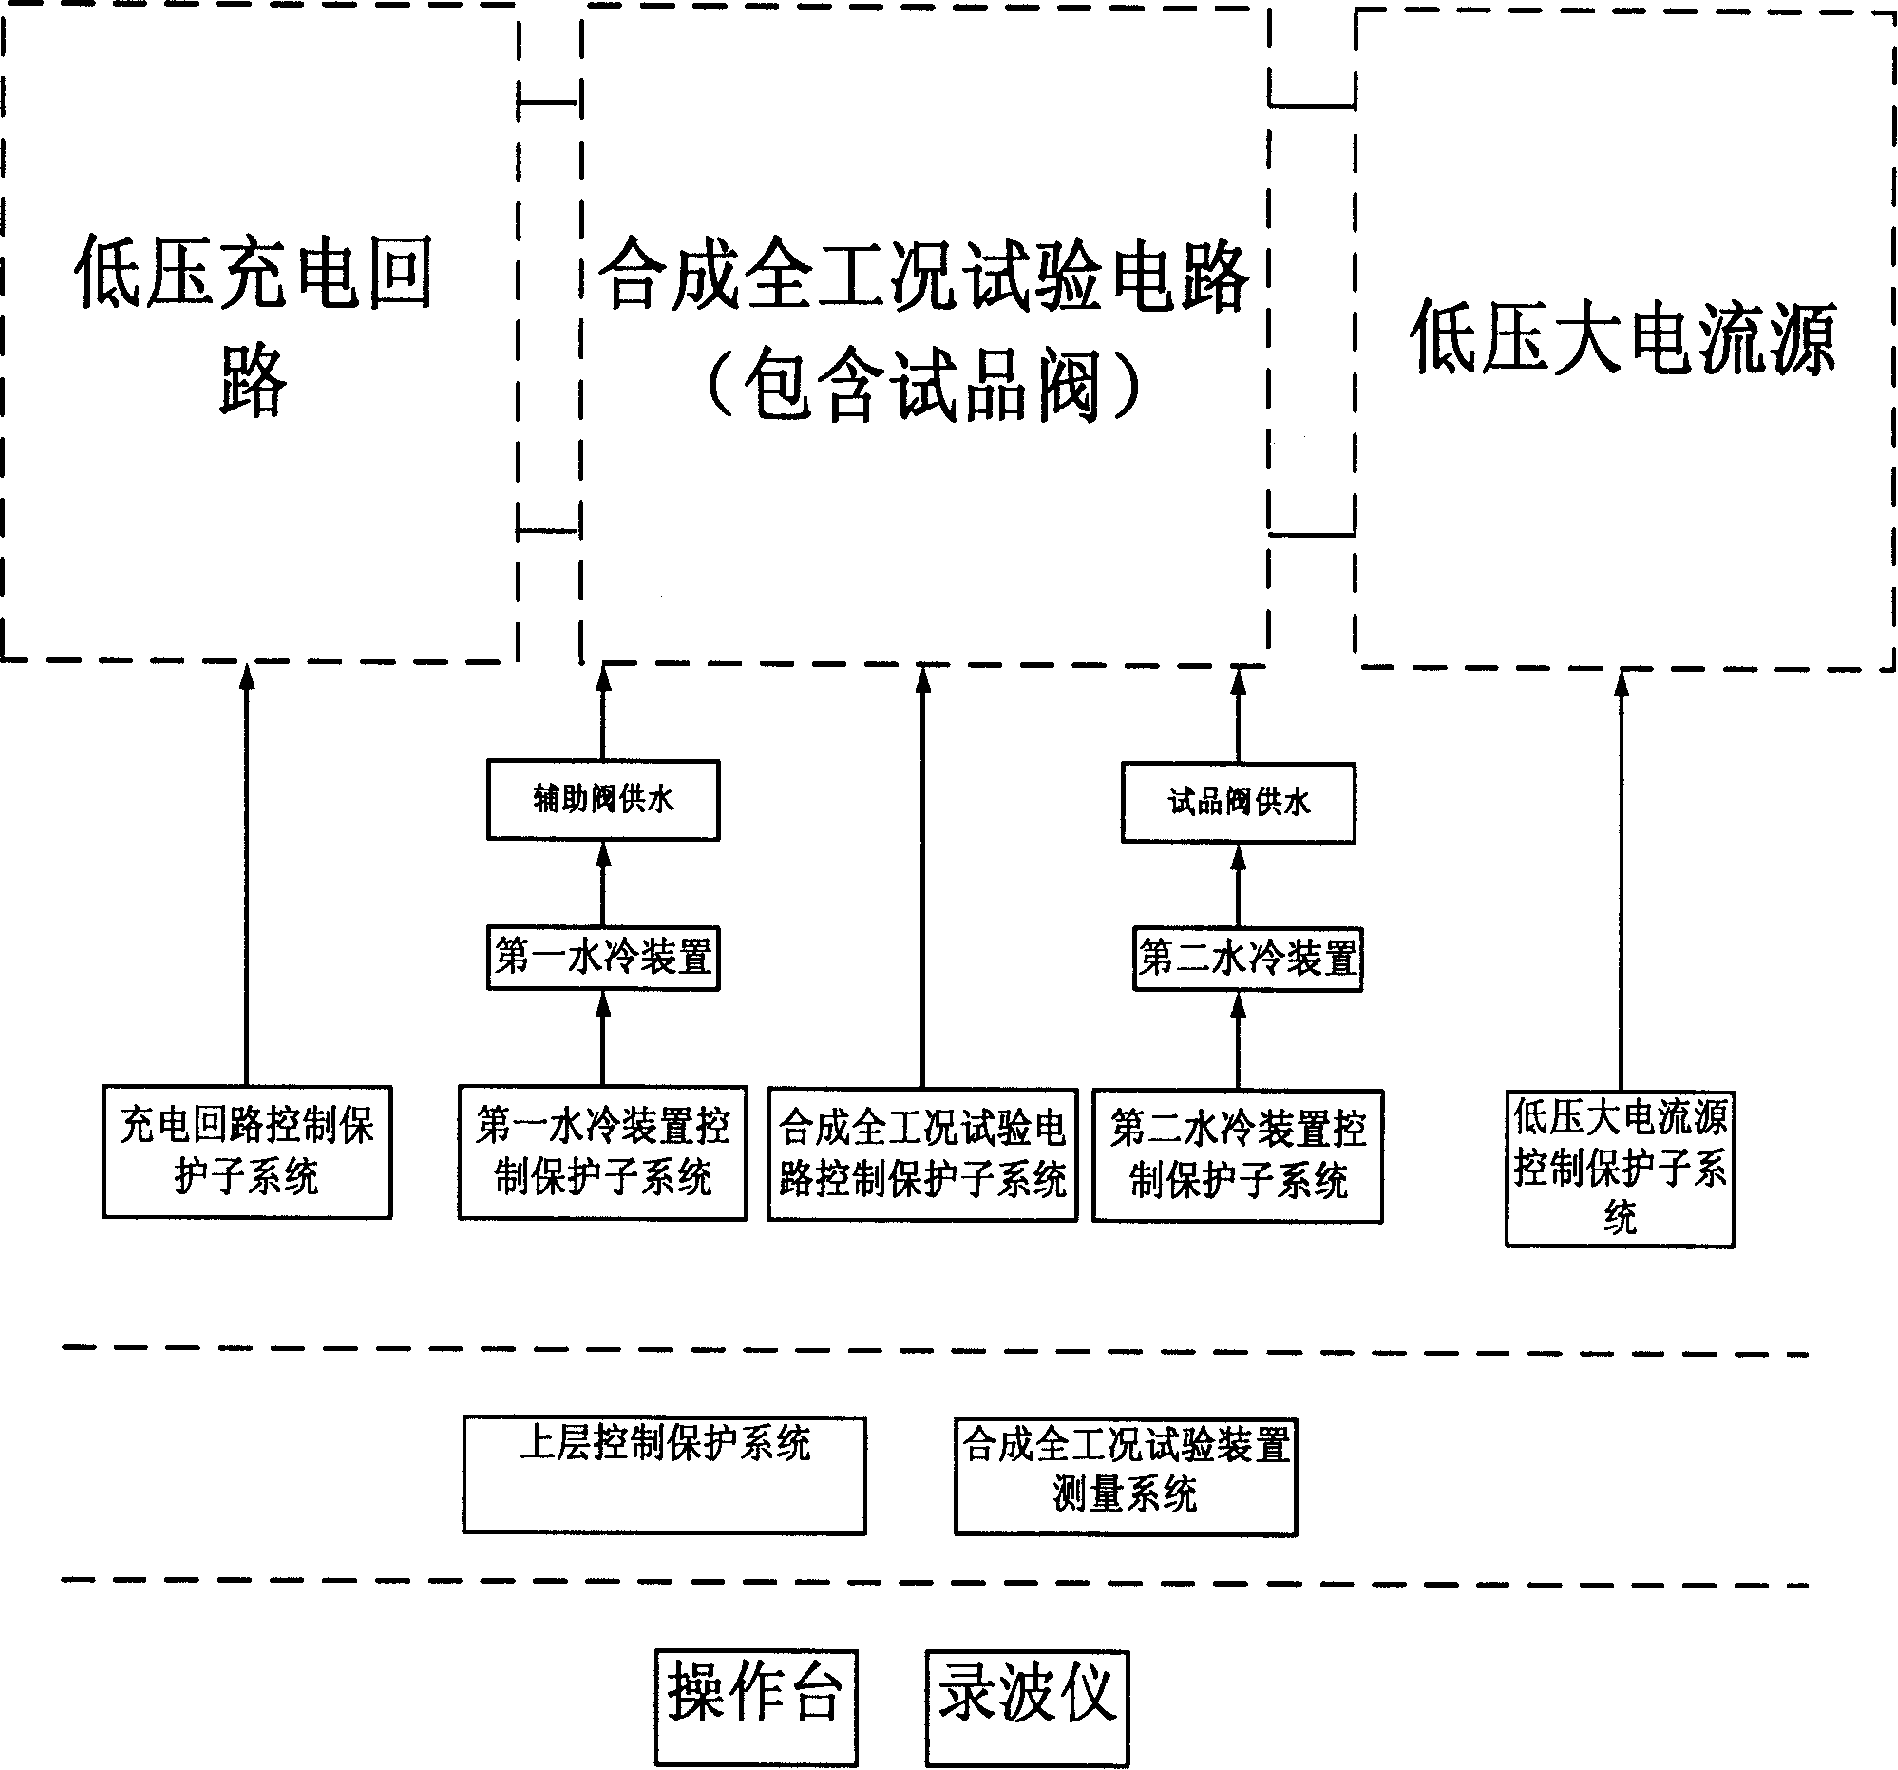 Compound whole-working order testing device control and protection system, and failure protection scheme